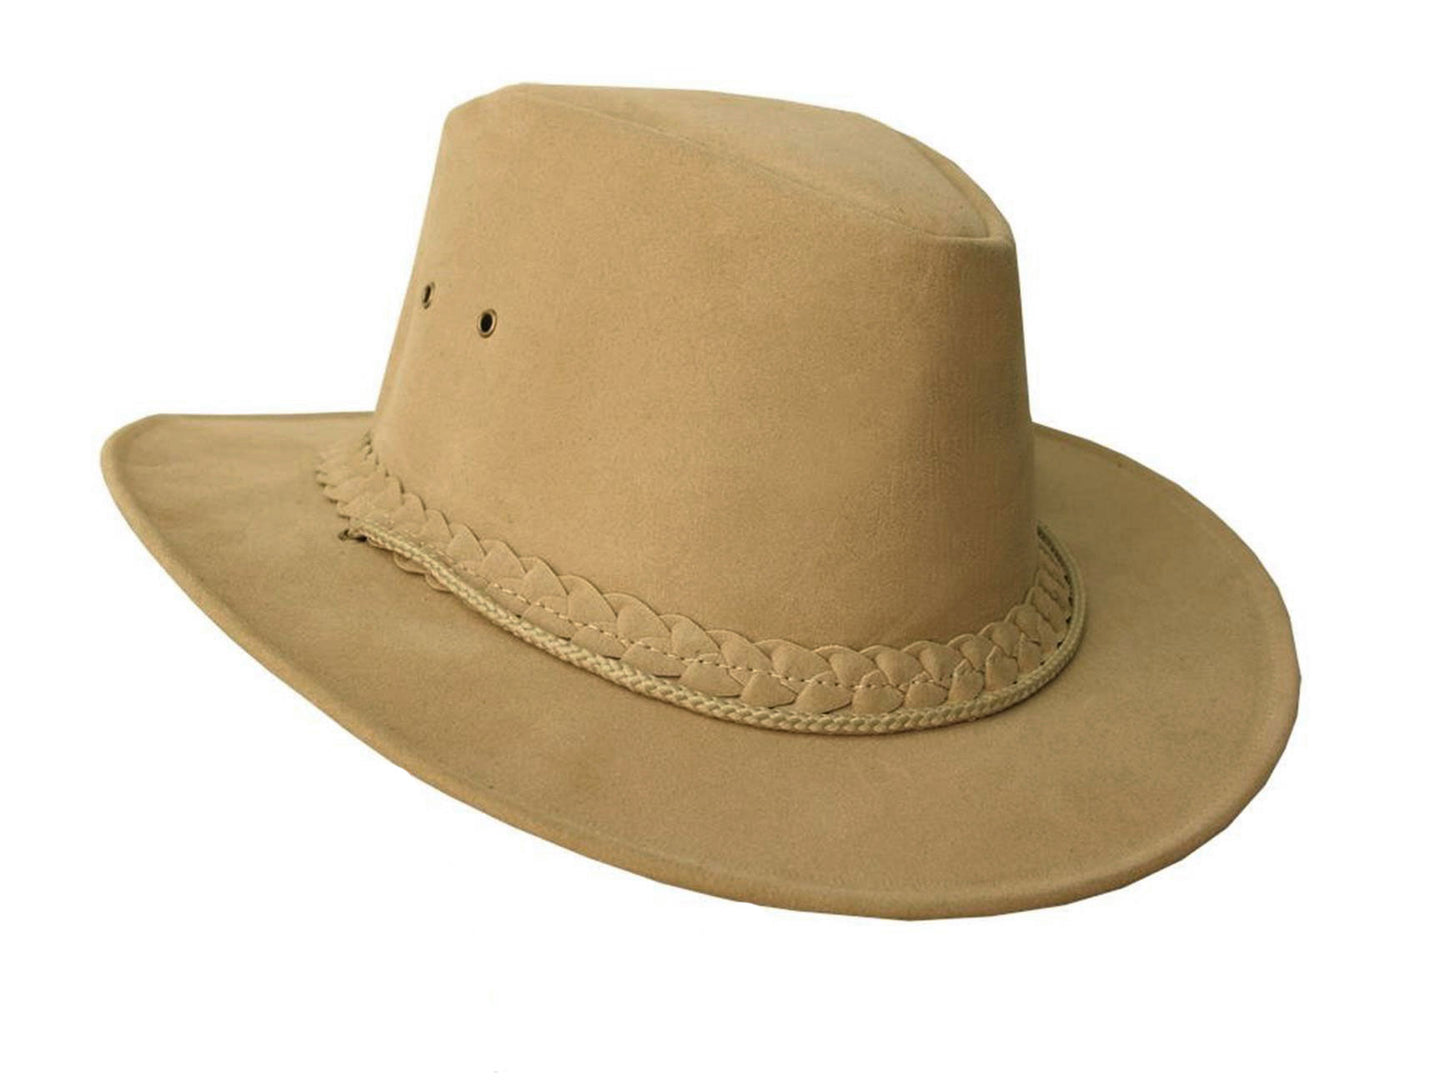 Outdoor summer hat in suede look super light and airy including chin strap waterproof with UV protection for men, women and children | beige